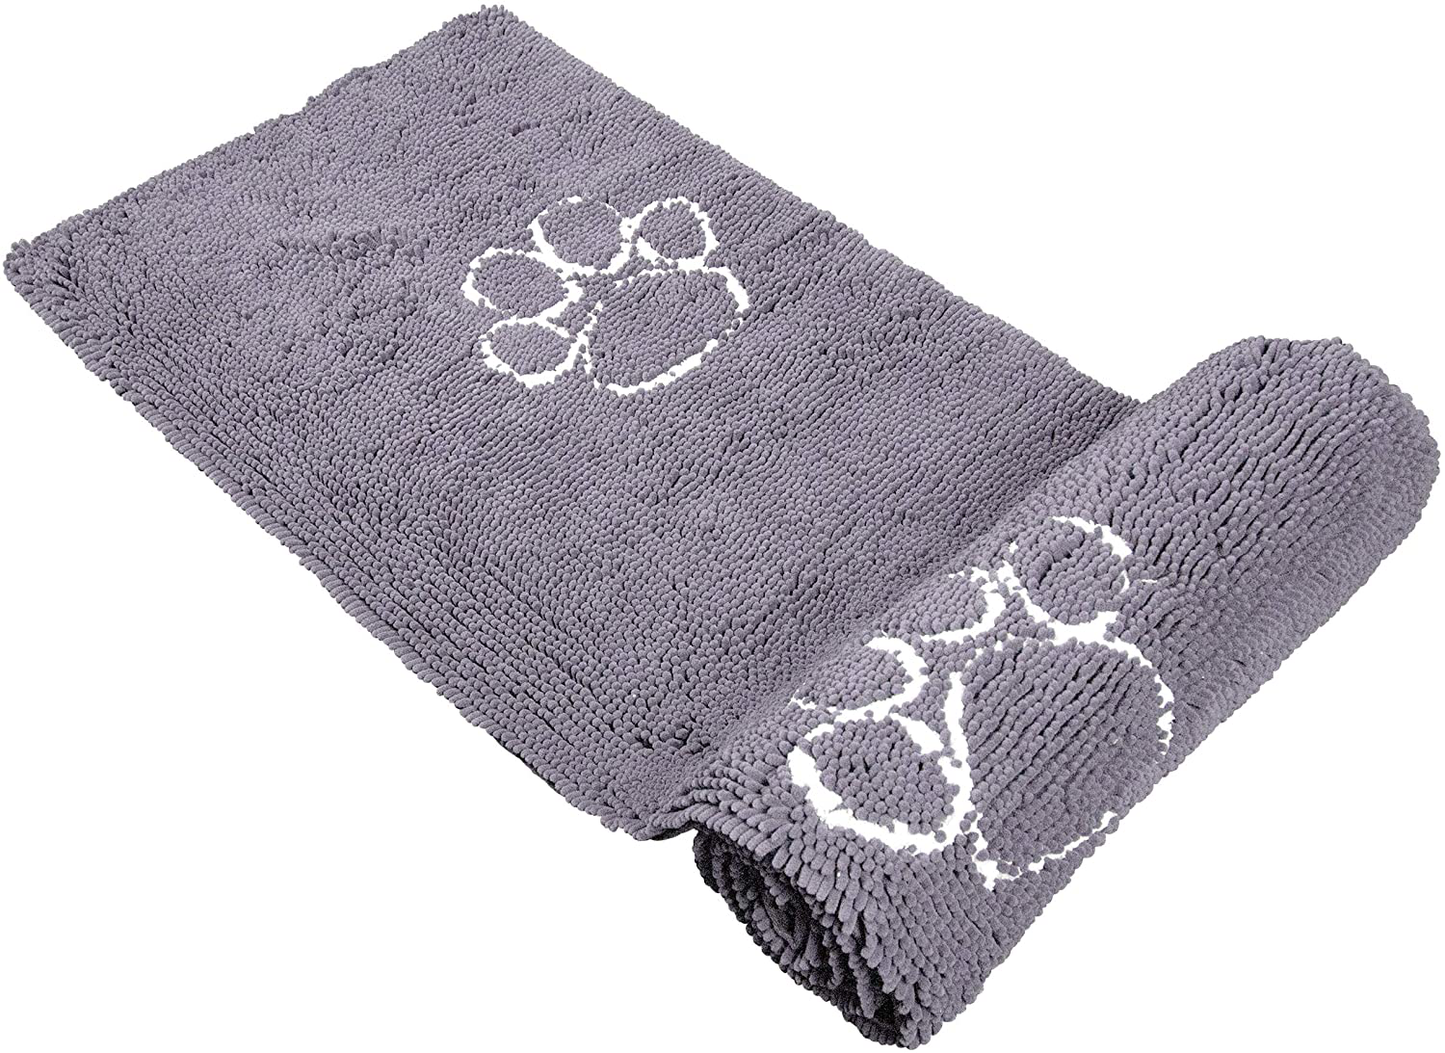 My Doggy Place - Ultra Absorbent Microfiber Dog Door Mat, Durable, Quick Drying, Washable, Prevent Mud Dirt, Keep Your House Clean (Violet W/Paw Print, Hallway Runner) - 8' X 2' Feet